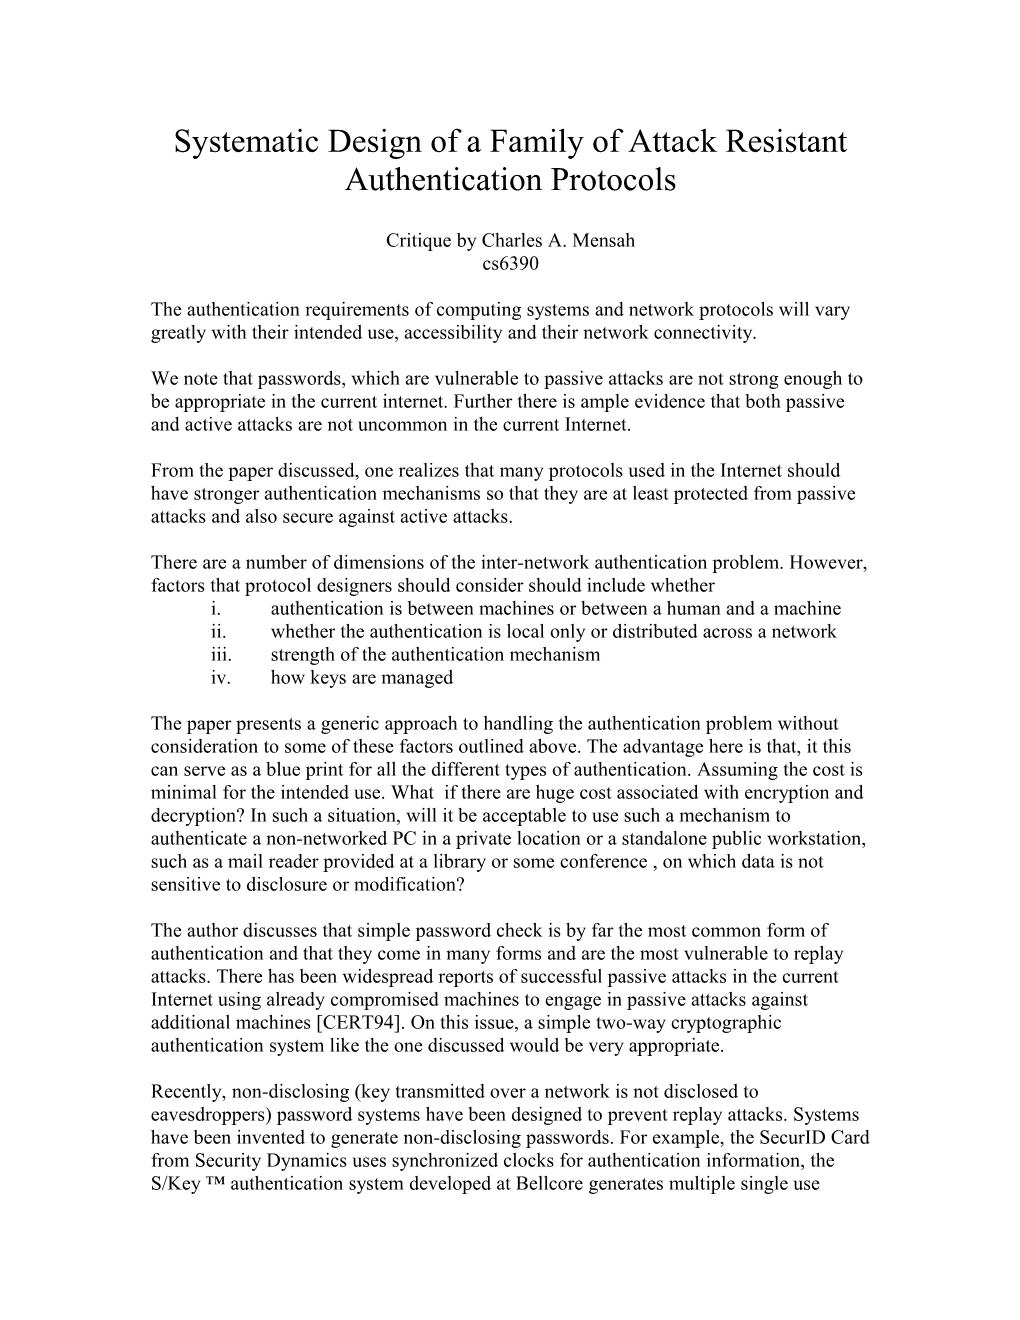 Systematic Design of a Family of Attack Resistant Authentication Protocols